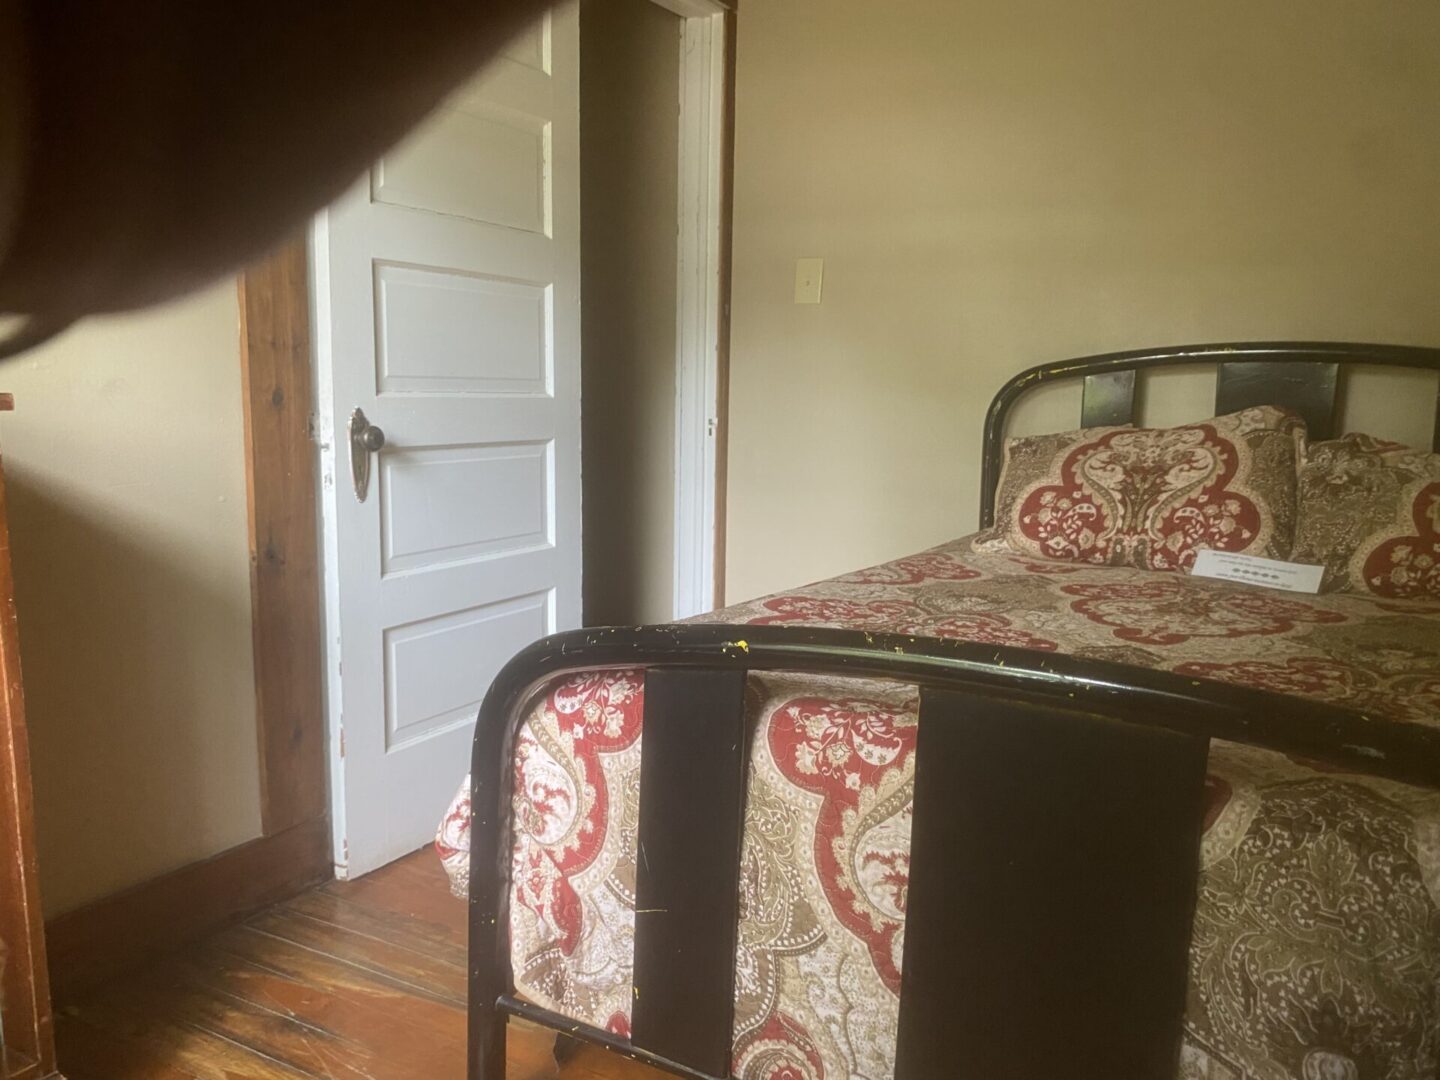 A bedroom with a bed and chair in it